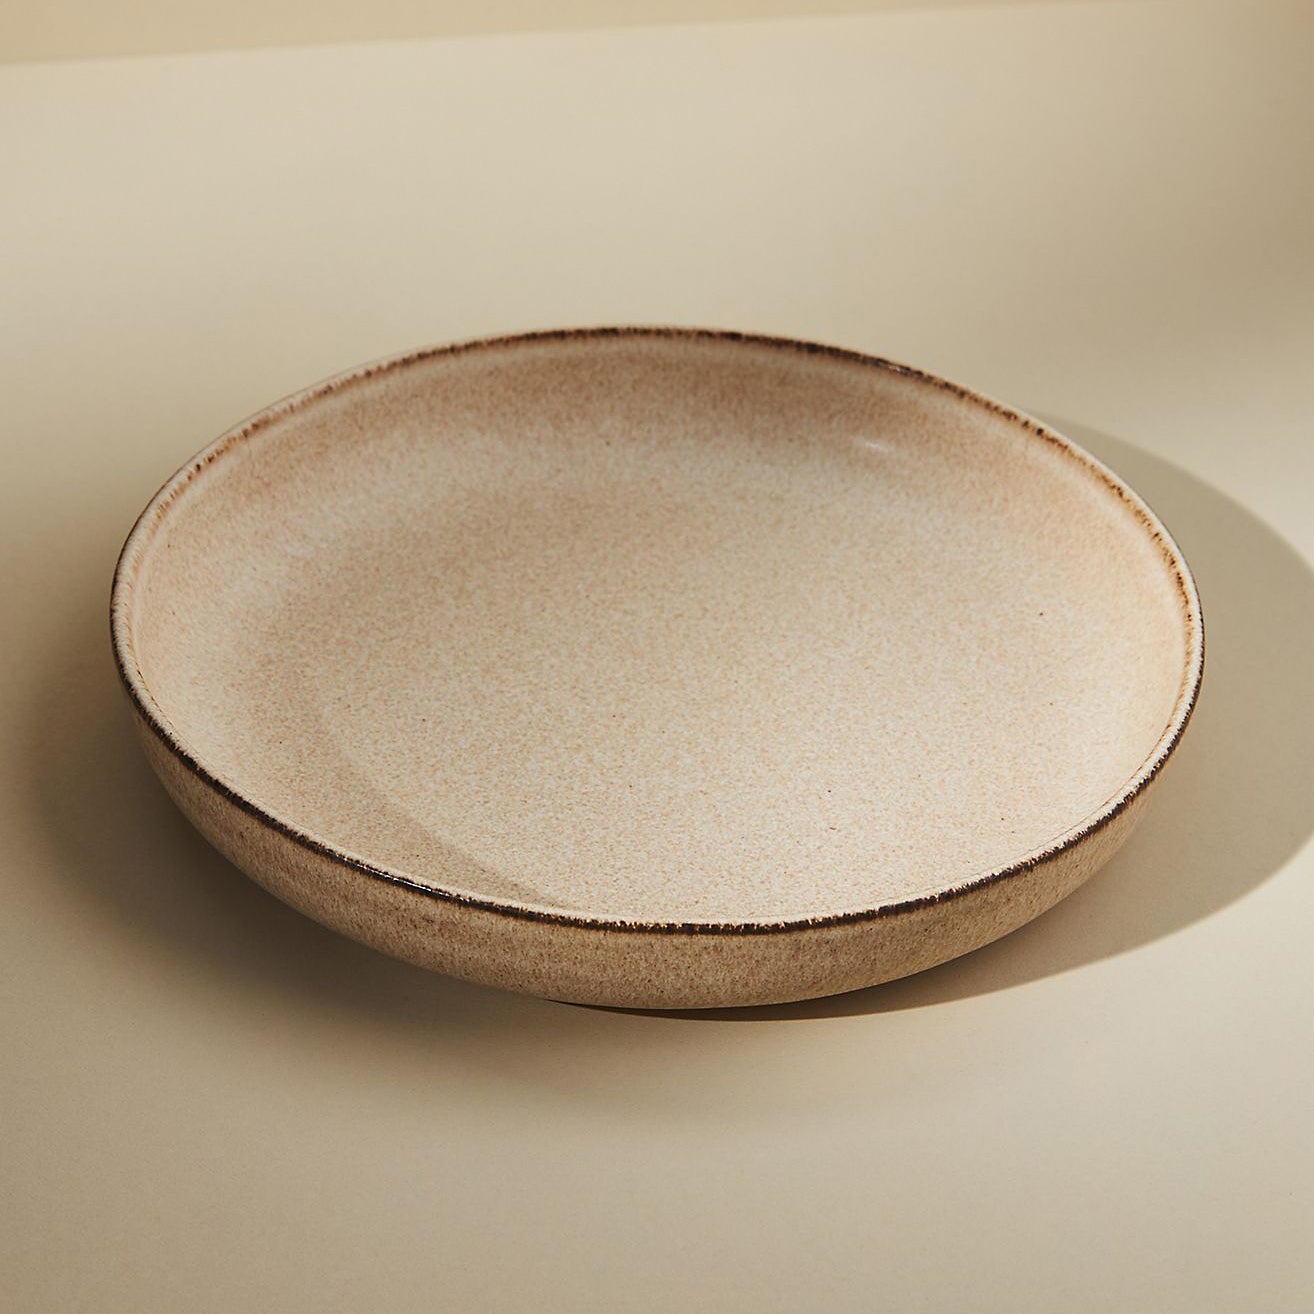 Terre shallow bowls